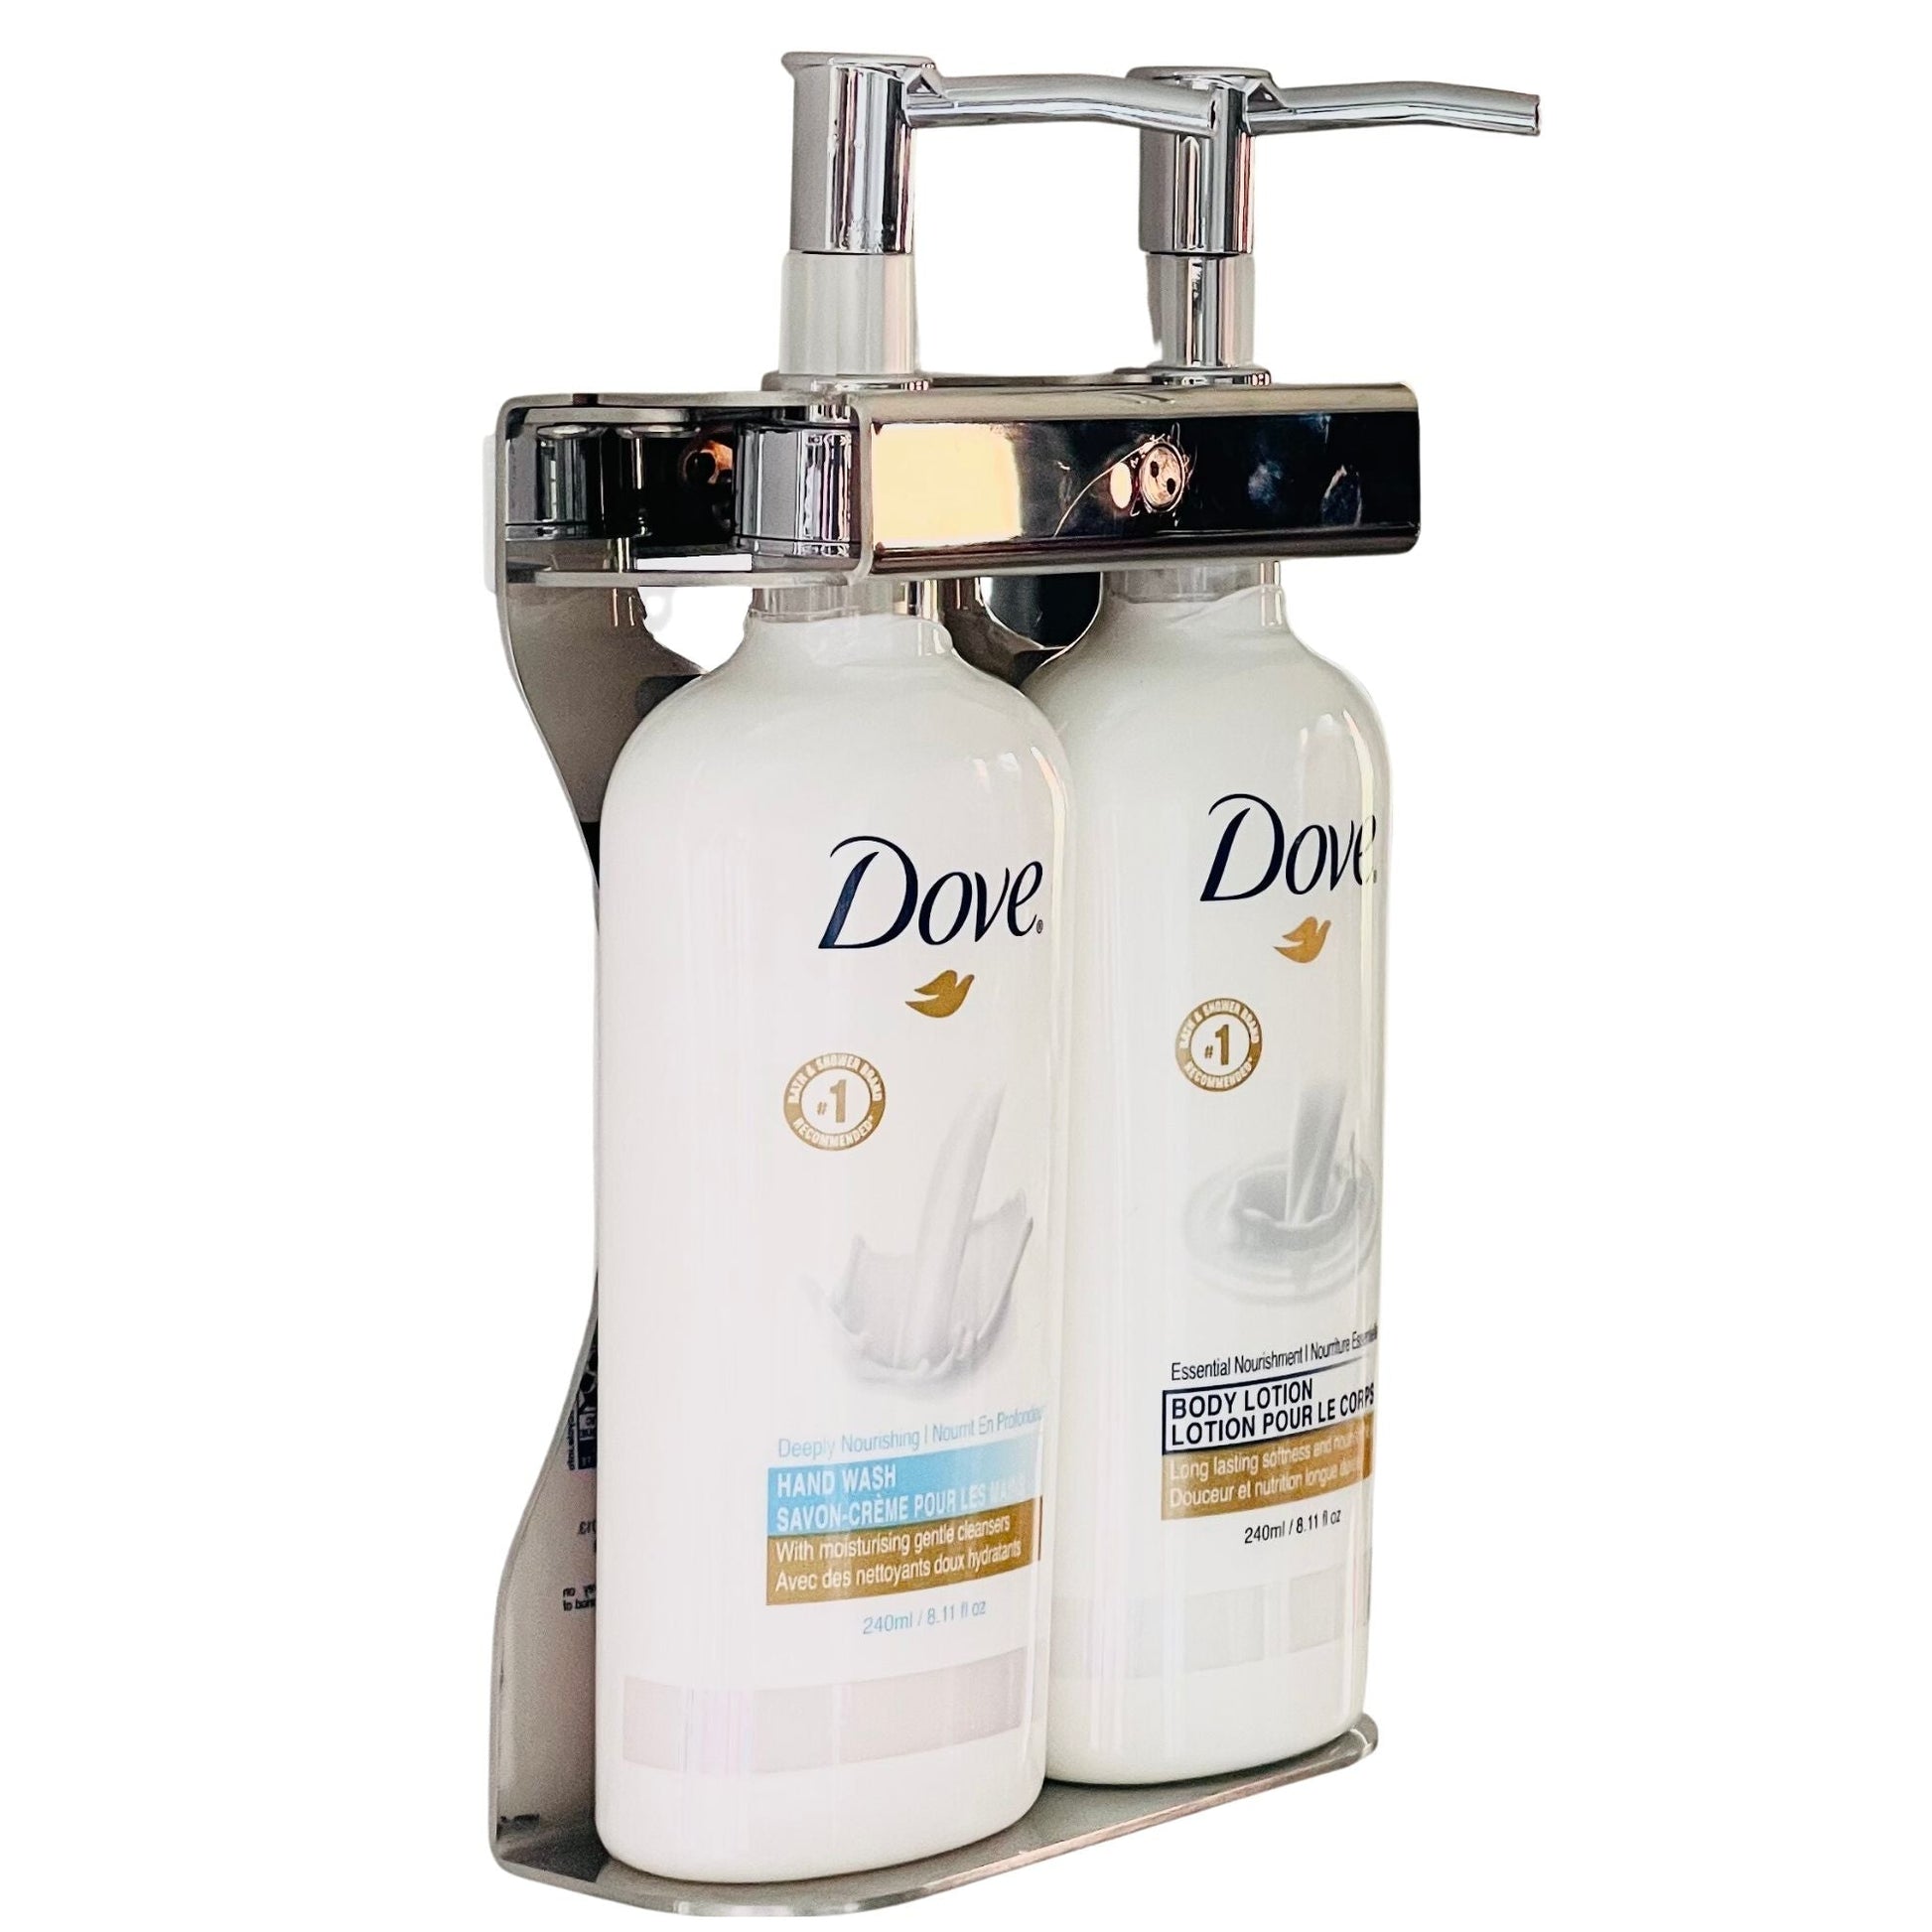 Double 240ml Stainless Steel Hotel Liquid Amenities Holder/Fixture with Tamper Resistant Locking System Media 2 of 5 - Available now at Canadian Hotel Supplies